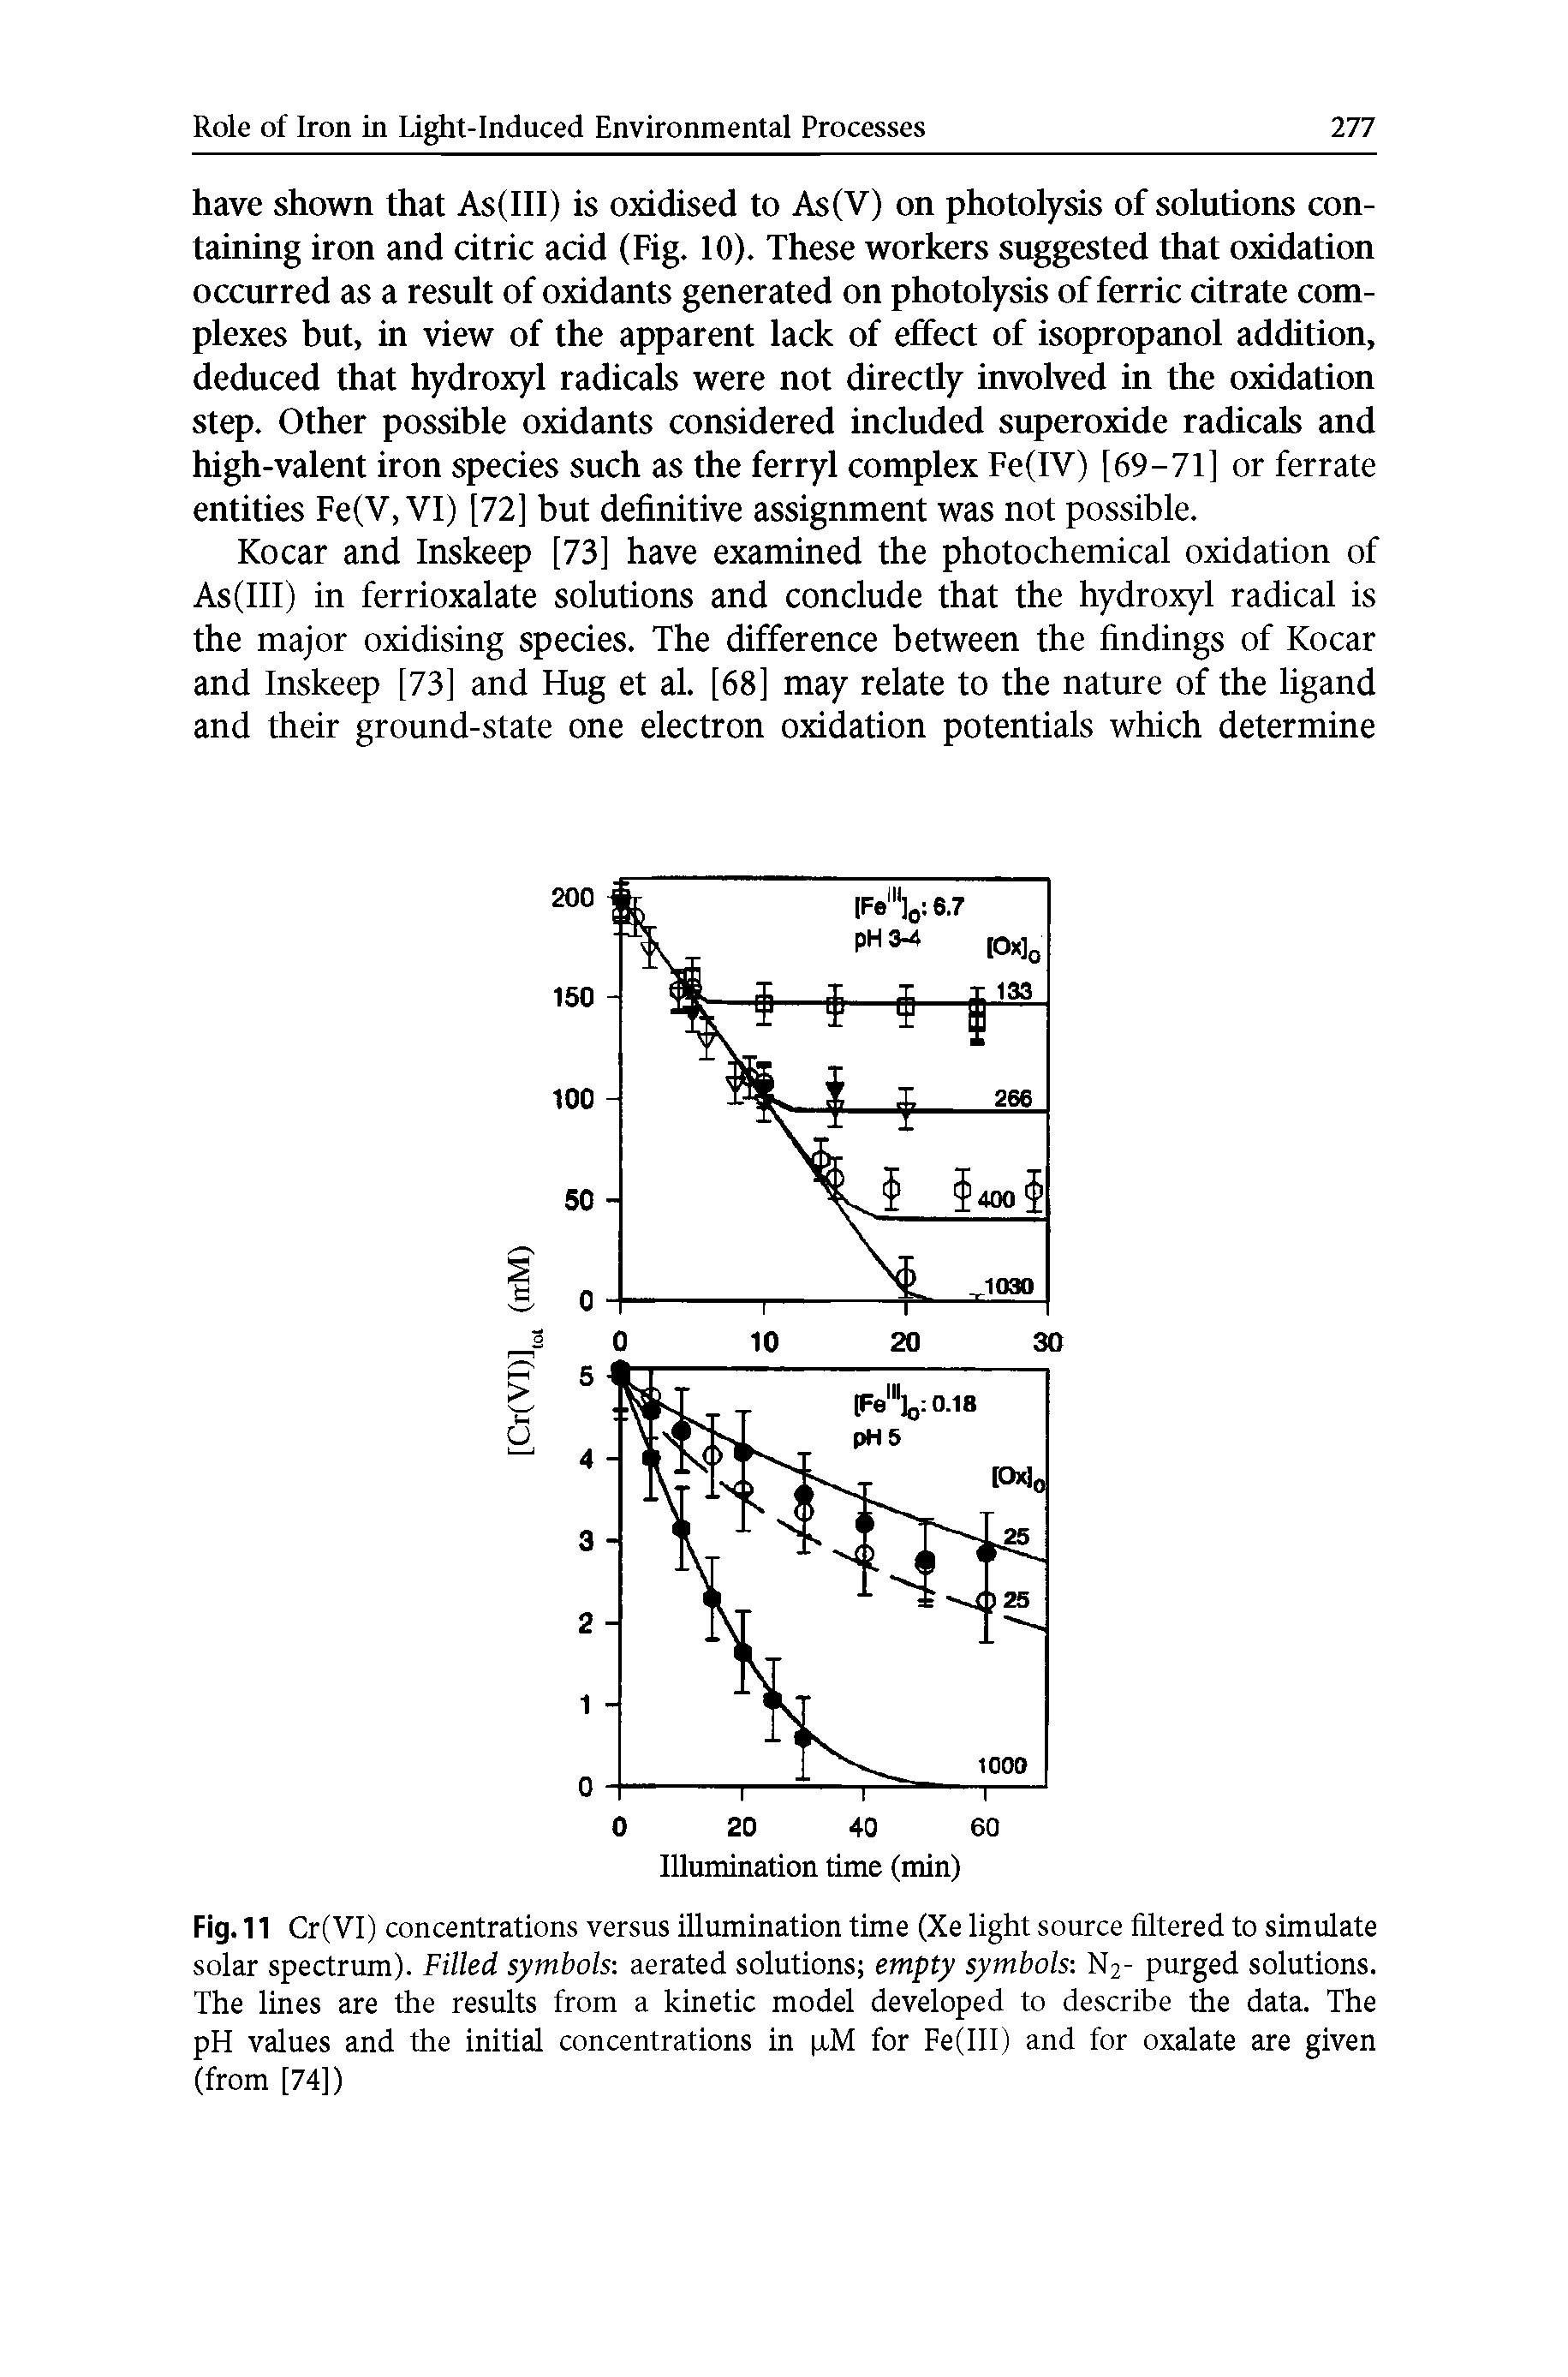 Fig. 11 Cr(VI) concentrations versus illumination time (Xe light source filtered to simulate solar spectrum). Filled symbols aerated solutions empty symbols N2- purged solutions. The lines are the results from a kinetic model developed to describe the data. The pH values and the initial concentrations in iM for Fe(III) and for oxalate are given (from [74])...